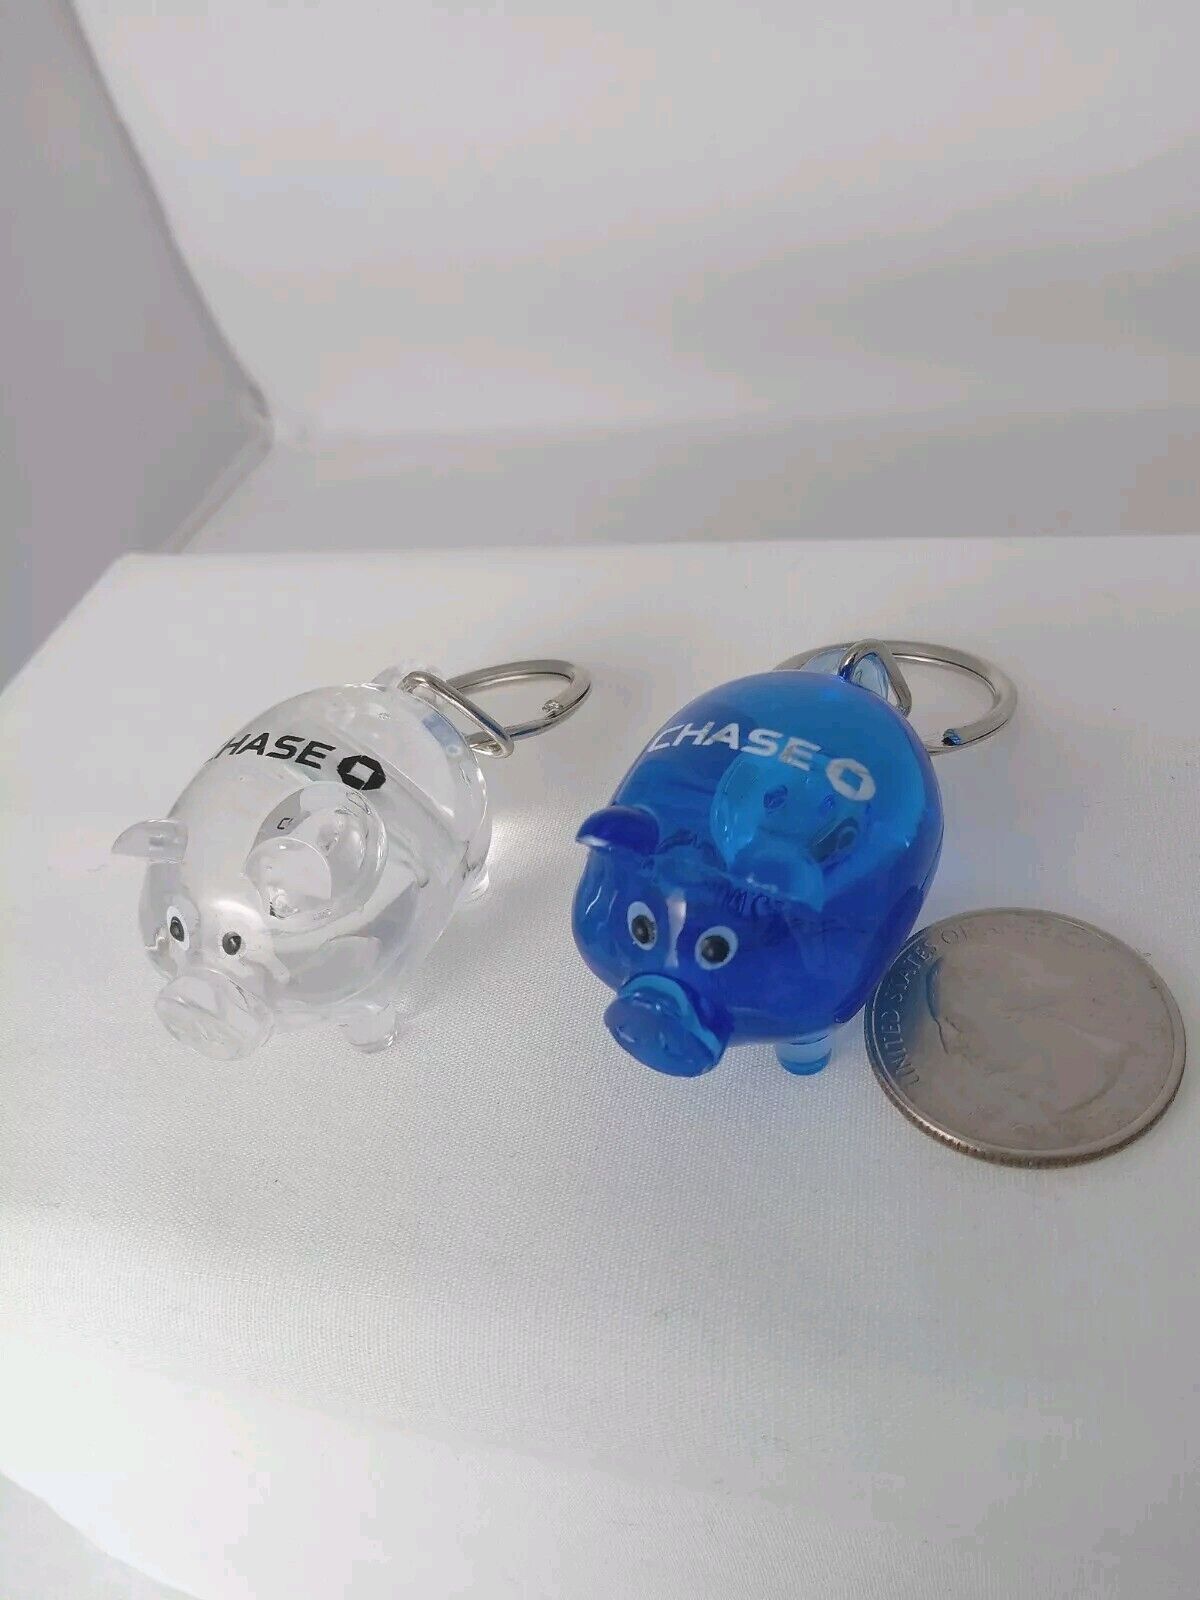 2 Chase Bank Pig Keychain Banking Advertising Logo Blue And Clear Acrylic NOS